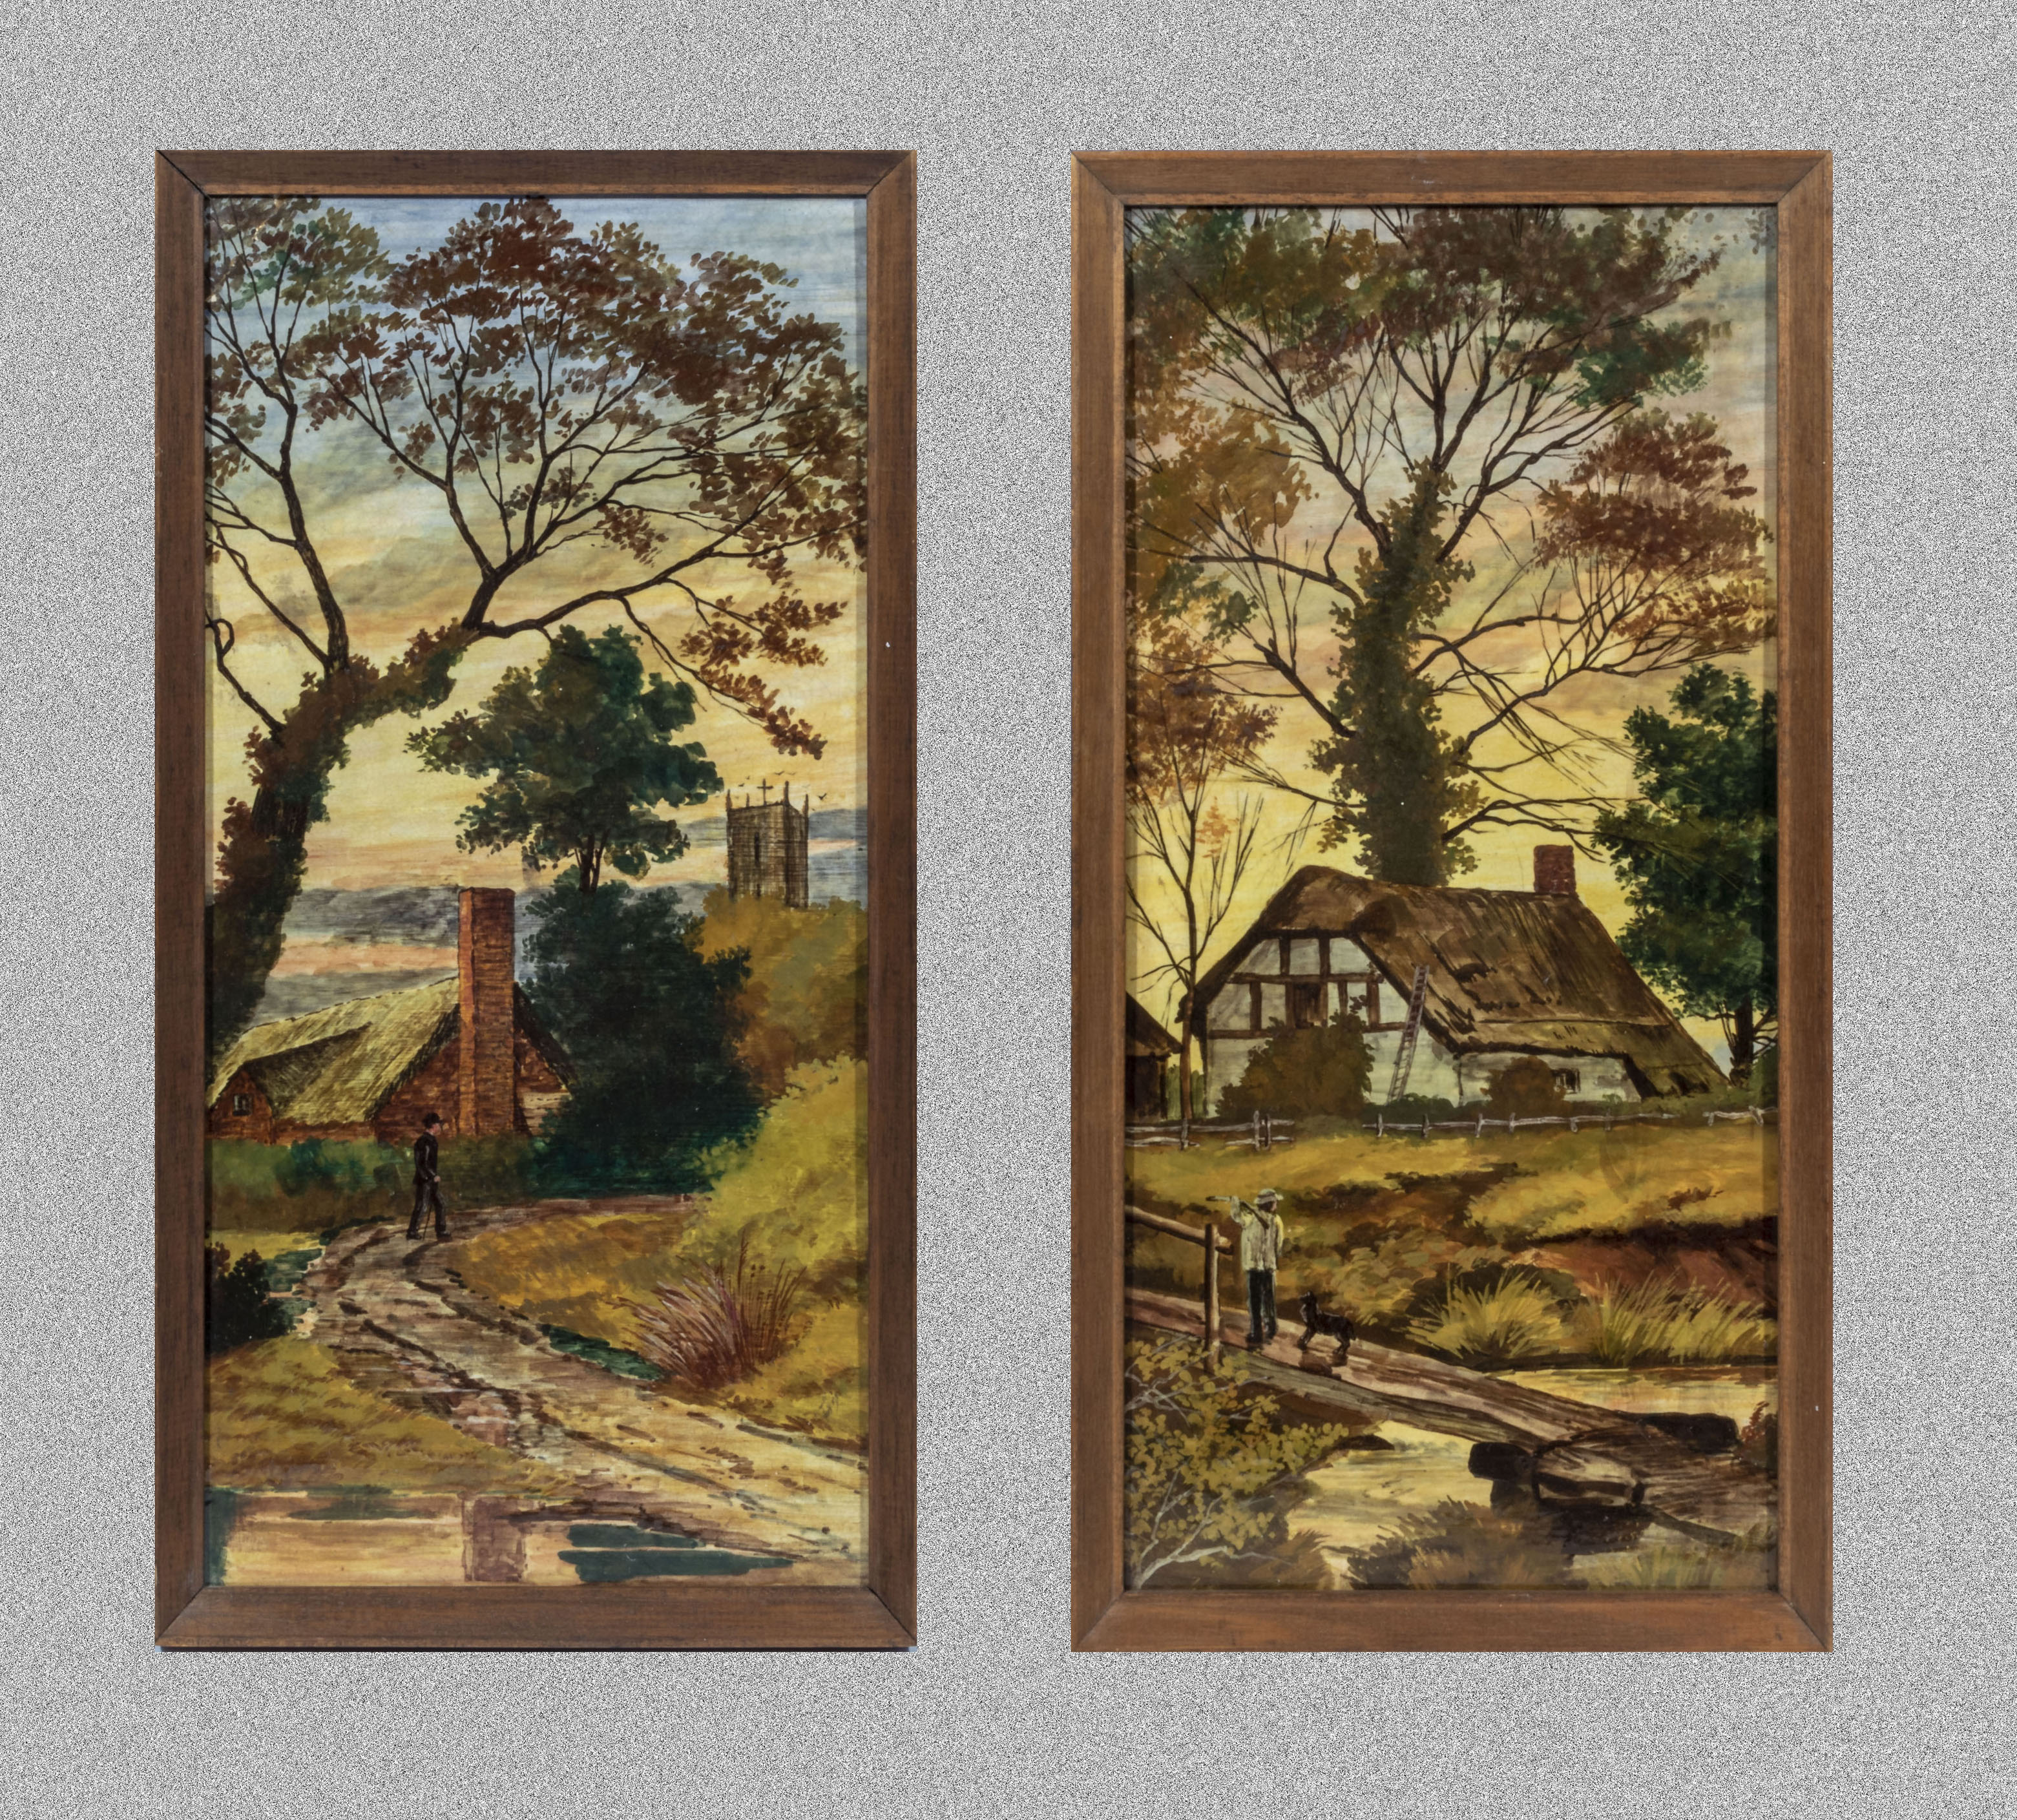 A pair of framed painted pottery tiles depicting rural scenes